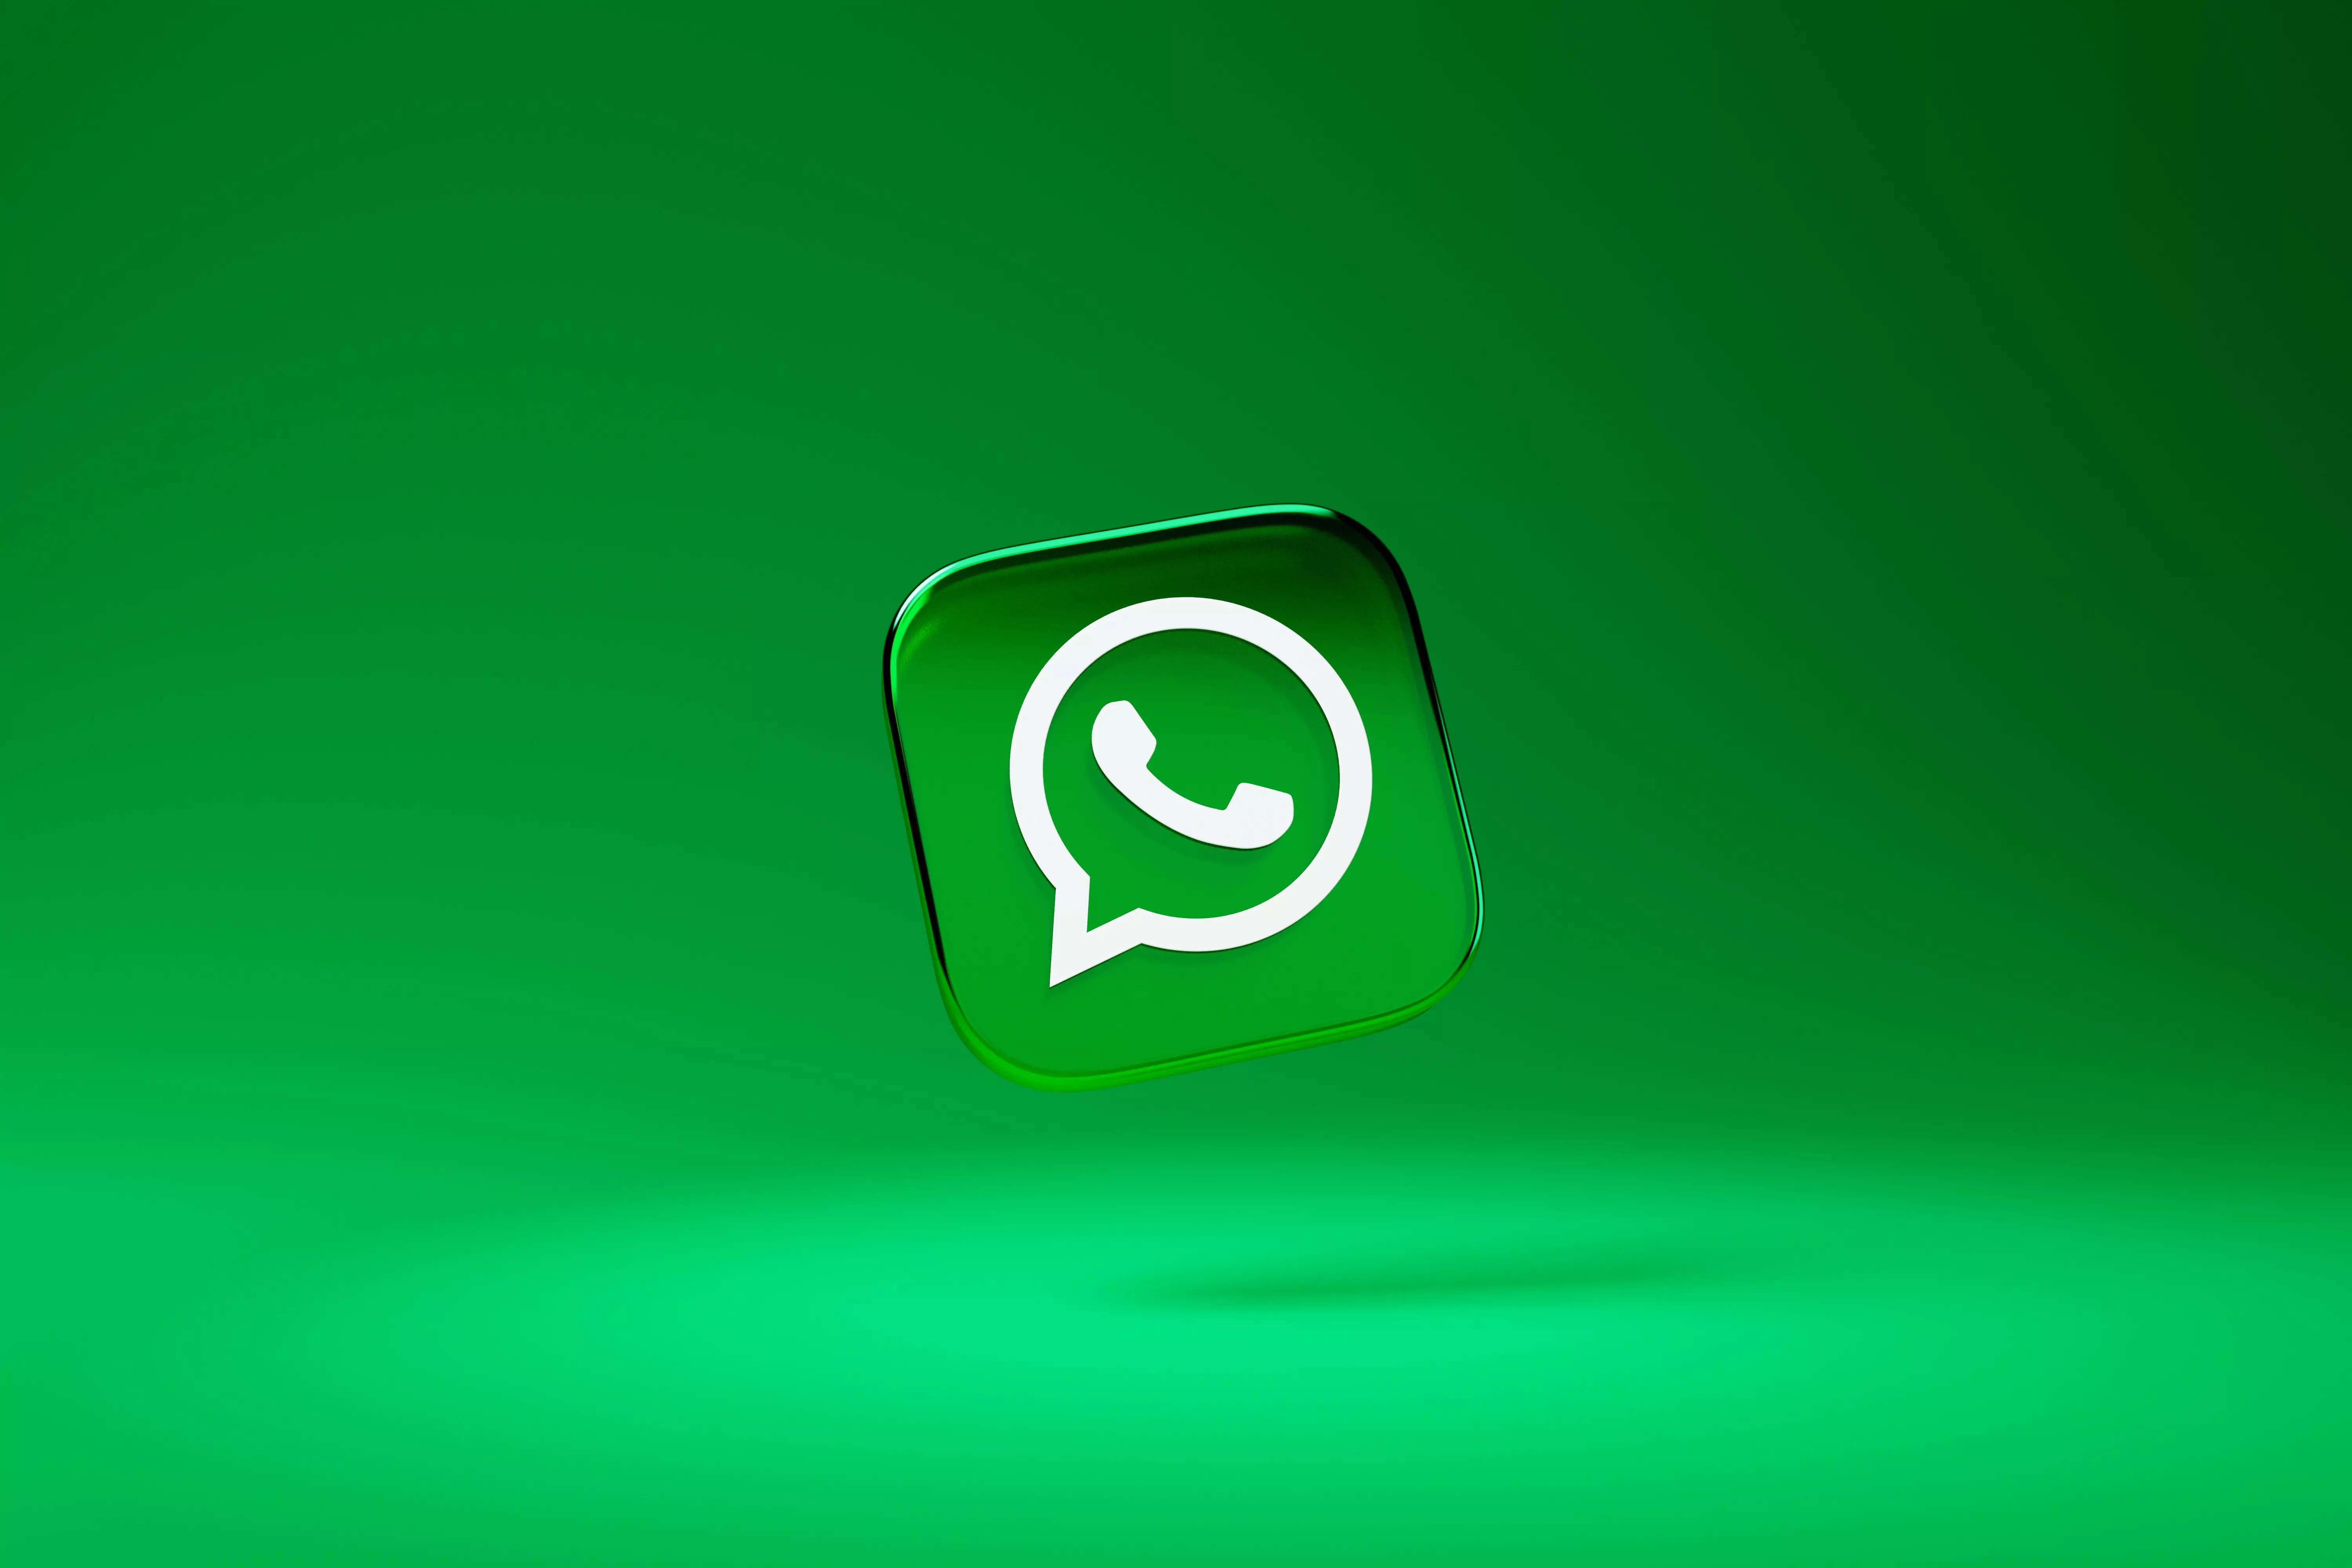 Explained: What is WhatsApp Communities feature, what it means for users, how it works and more - Times of India